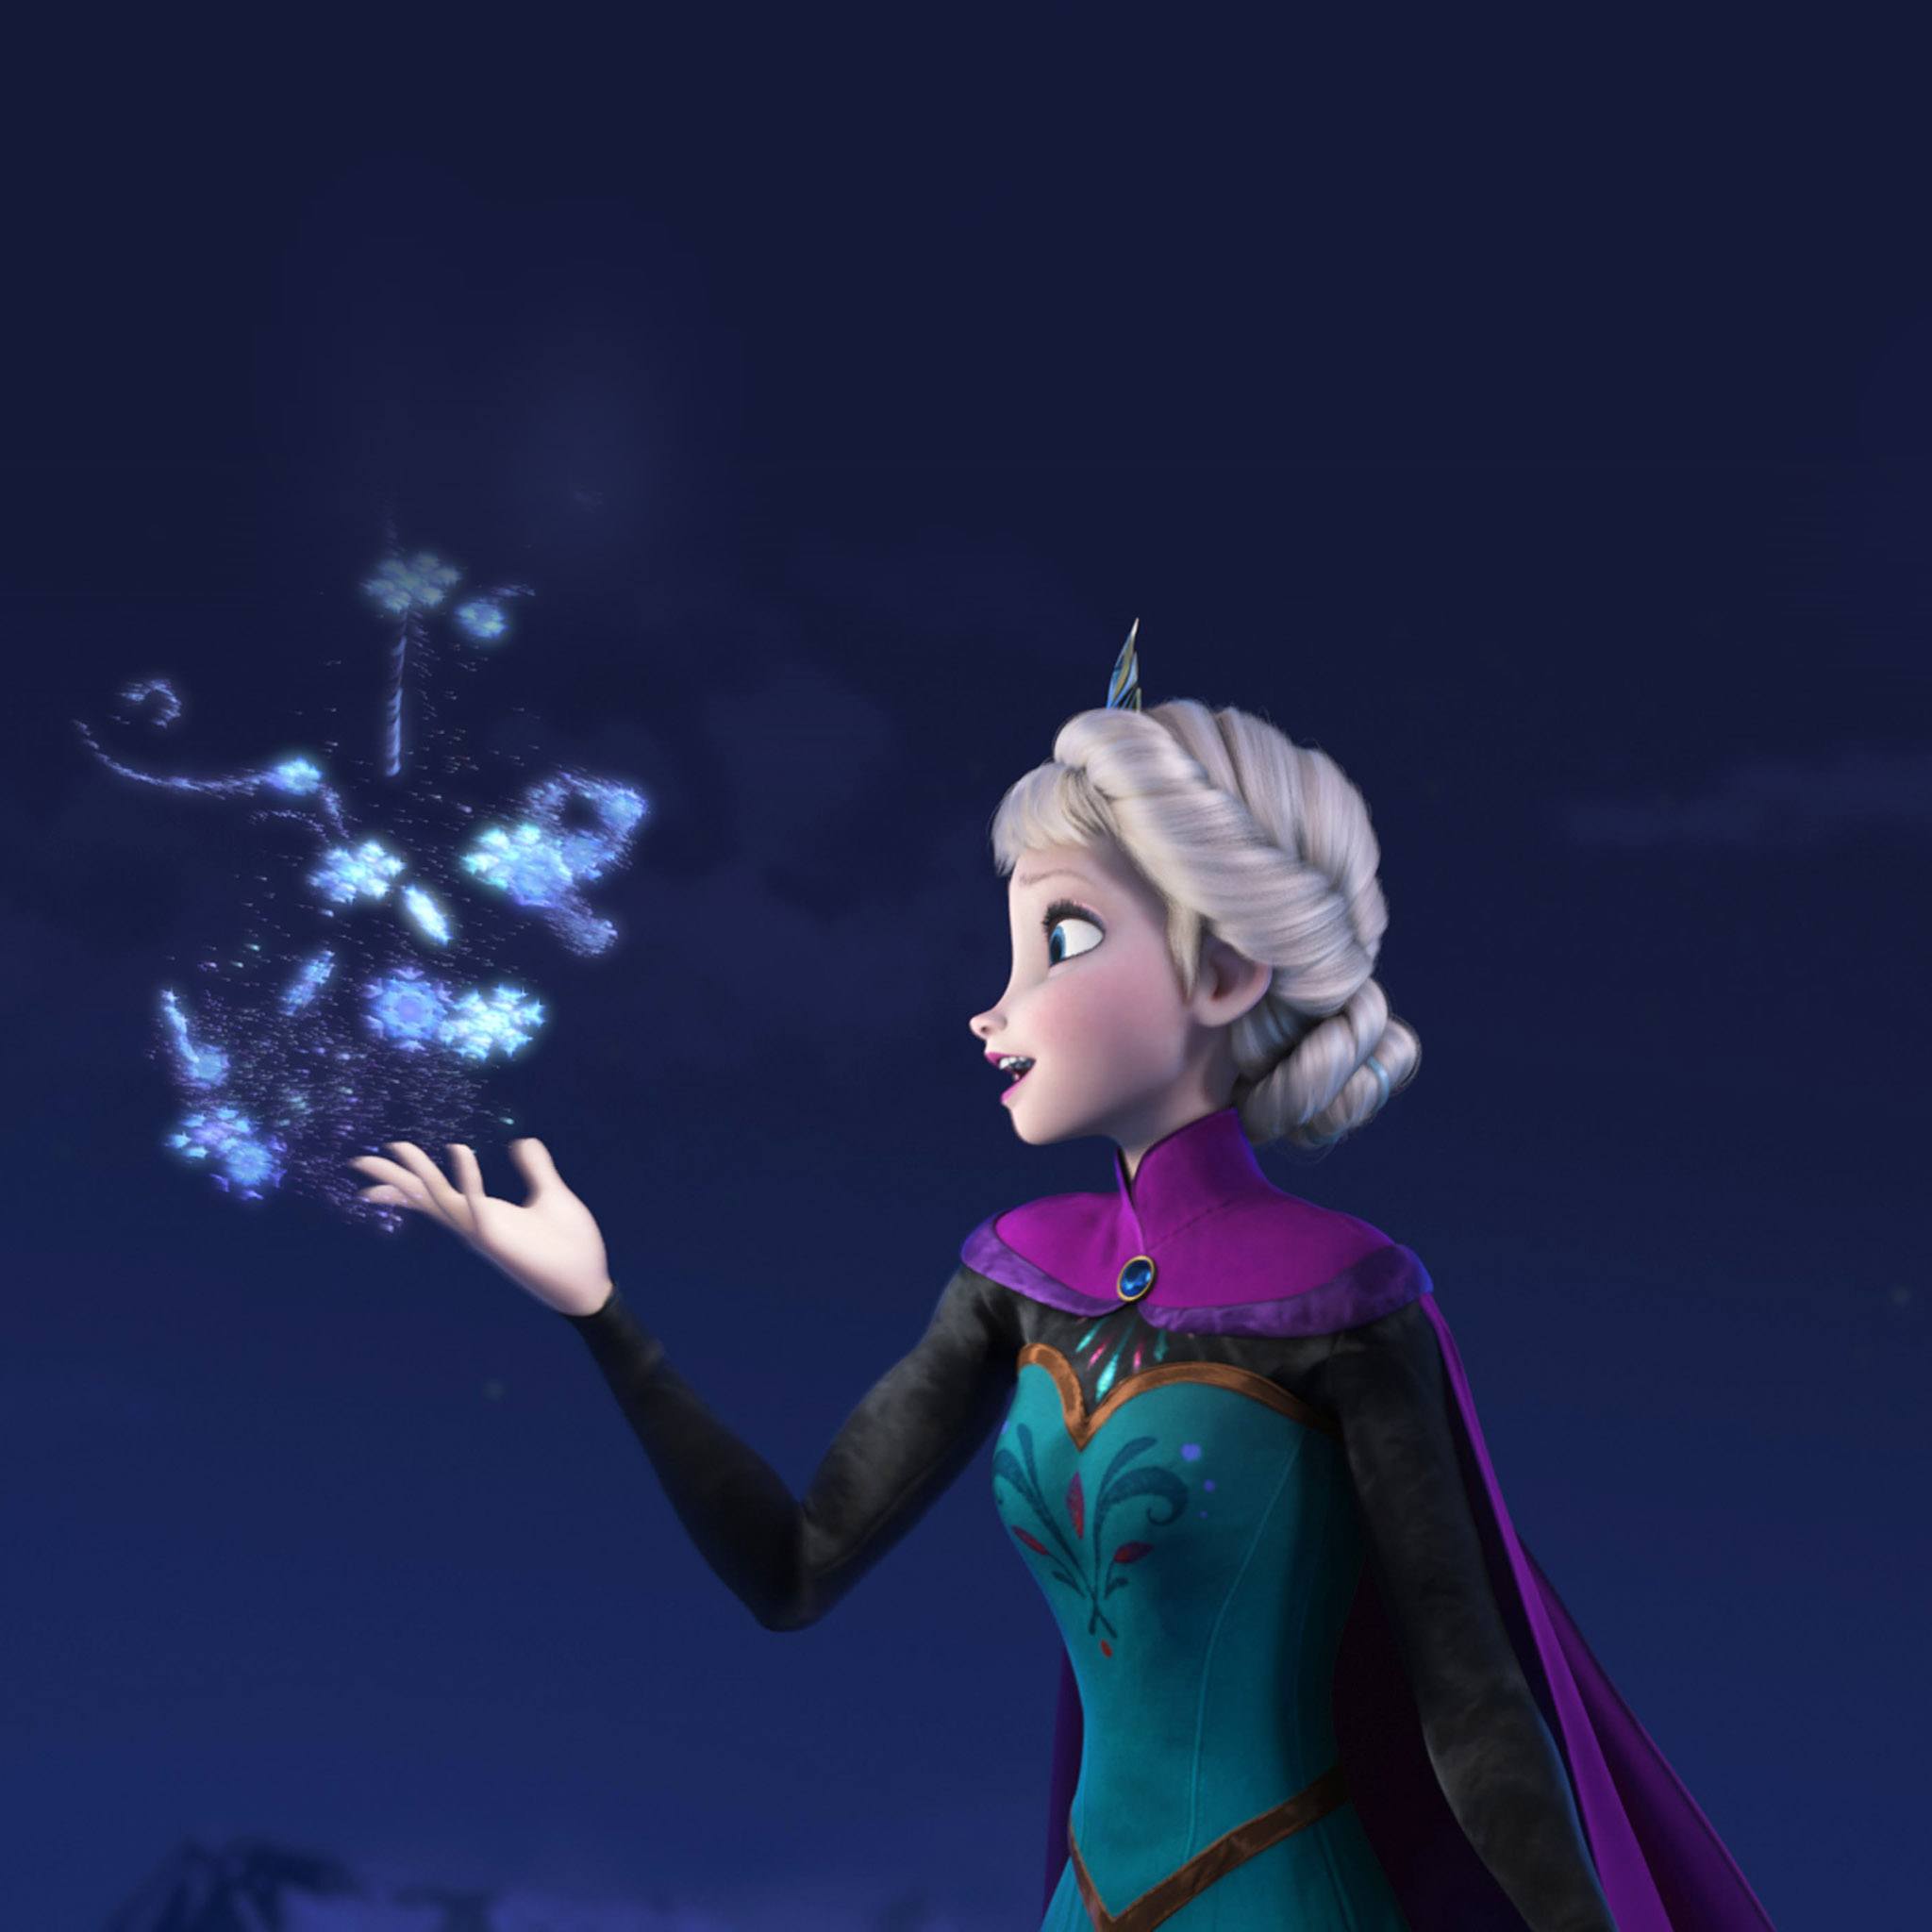  Frozen[iPad Free Wallpapers for iPad